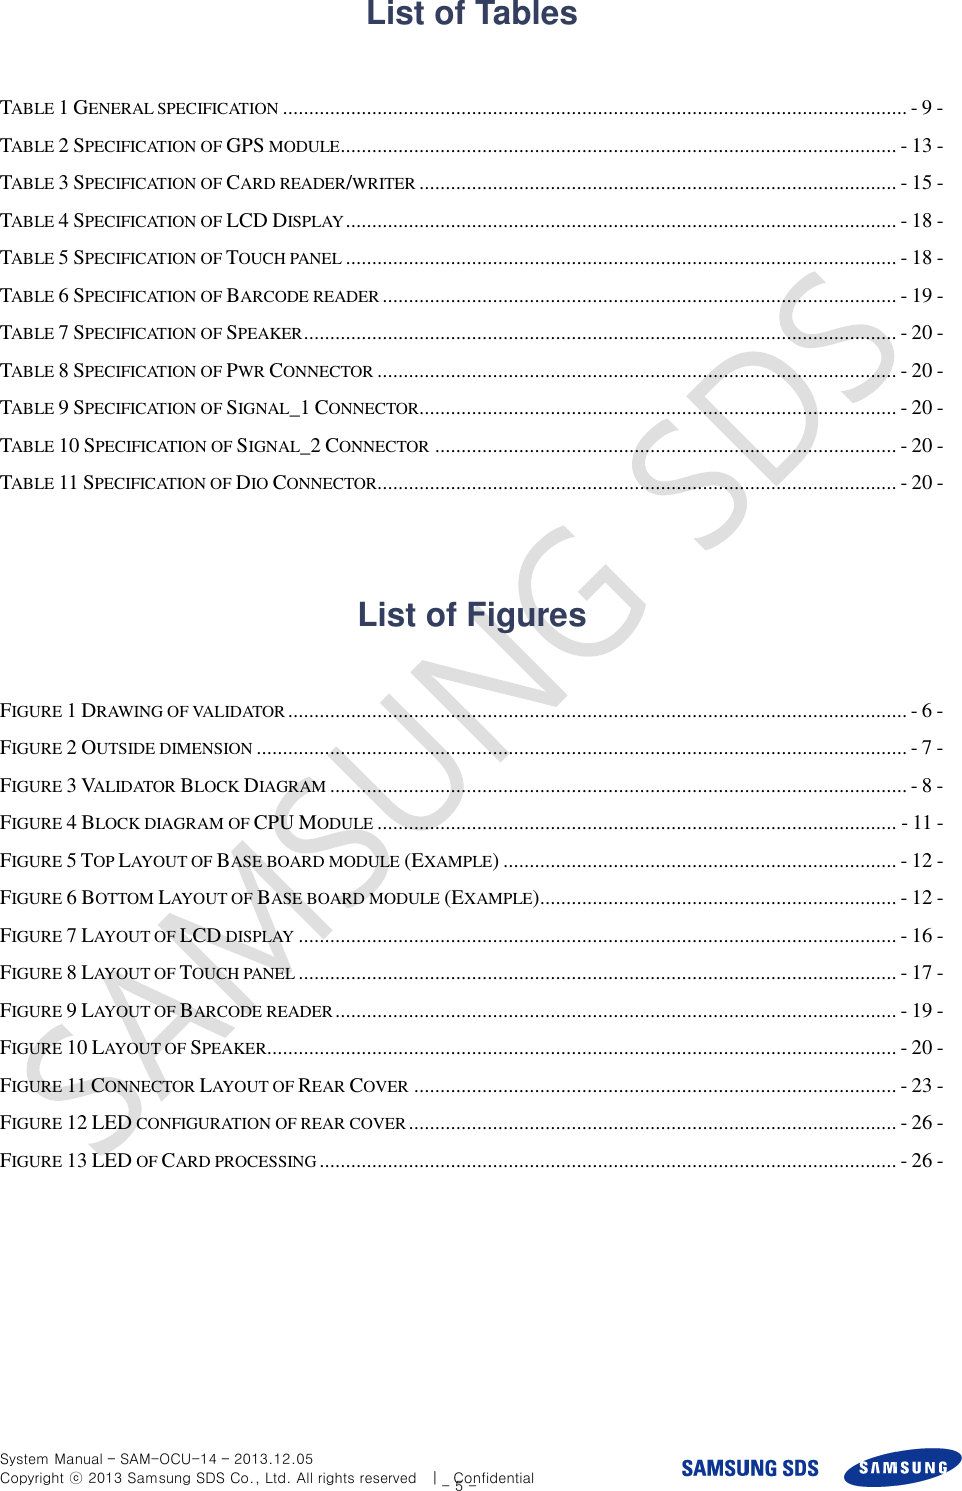  System Manual – SAM-OCU-14 – 2013.12.05 Copyright ⓒ 2013 Samsung SDS Co., Ltd. All rights reserved    |    Confidential - 5 - List of Tables  TABLE 1 GENERAL SPECIFICATION ....................................................................................................................... - 9 - TABLE 2 SPECIFICATION OF GPS MODULE .......................................................................................................... - 13 - TABLE 3 SPECIFICATION OF CARD READER/WRITER ........................................................................................... - 15 - TABLE 4 SPECIFICATION OF LCD DISPLAY ......................................................................................................... - 18 - TABLE 5 SPECIFICATION OF TOUCH PANEL ......................................................................................................... - 18 - TABLE 6 SPECIFICATION OF BARCODE READER .................................................................................................. - 19 - TABLE 7 SPECIFICATION OF SPEAKER ................................................................................................................. - 20 - TABLE 8 SPECIFICATION OF PWR CONNECTOR ................................................................................................... - 20 - TABLE 9 SPECIFICATION OF SIGNAL_1 CONNECTOR........................................................................................... - 20 - TABLE 10 SPECIFICATION OF SIGNAL_2 CONNECTOR ........................................................................................ - 20 - TABLE 11 SPECIFICATION OF DIO CONNECTOR................................................................................................... - 20 -   List of Figures  FIGURE 1 DRAWING OF VALIDATOR ...................................................................................................................... - 6 - FIGURE 2 OUTSIDE DIMENSION ............................................................................................................................ - 7 - FIGURE 3 VALIDATOR BLOCK DIAGRAM .............................................................................................................. - 8 - FIGURE 4 BLOCK DIAGRAM OF CPU MODULE ................................................................................................... - 11 - FIGURE 5 TOP LAYOUT OF BASE BOARD MODULE (EXAMPLE) ........................................................................... - 12 - FIGURE 6 BOTTOM LAYOUT OF BASE BOARD MODULE (EXAMPLE) .................................................................... - 12 - FIGURE 7 LAYOUT OF LCD DISPLAY .................................................................................................................. - 16 - FIGURE 8 LAYOUT OF TOUCH PANEL .................................................................................................................. - 17 - FIGURE 9 LAYOUT OF BARCODE READER ........................................................................................................... - 19 - FIGURE 10 LAYOUT OF SPEAKER ........................................................................................................................ - 20 - FIGURE 11 CONNECTOR LAYOUT OF REAR COVER ............................................................................................ - 23 - FIGURE 12 LED CONFIGURATION OF REAR COVER ............................................................................................. - 26 - FIGURE 13 LED OF CARD PROCESSING .............................................................................................................. - 26 -  